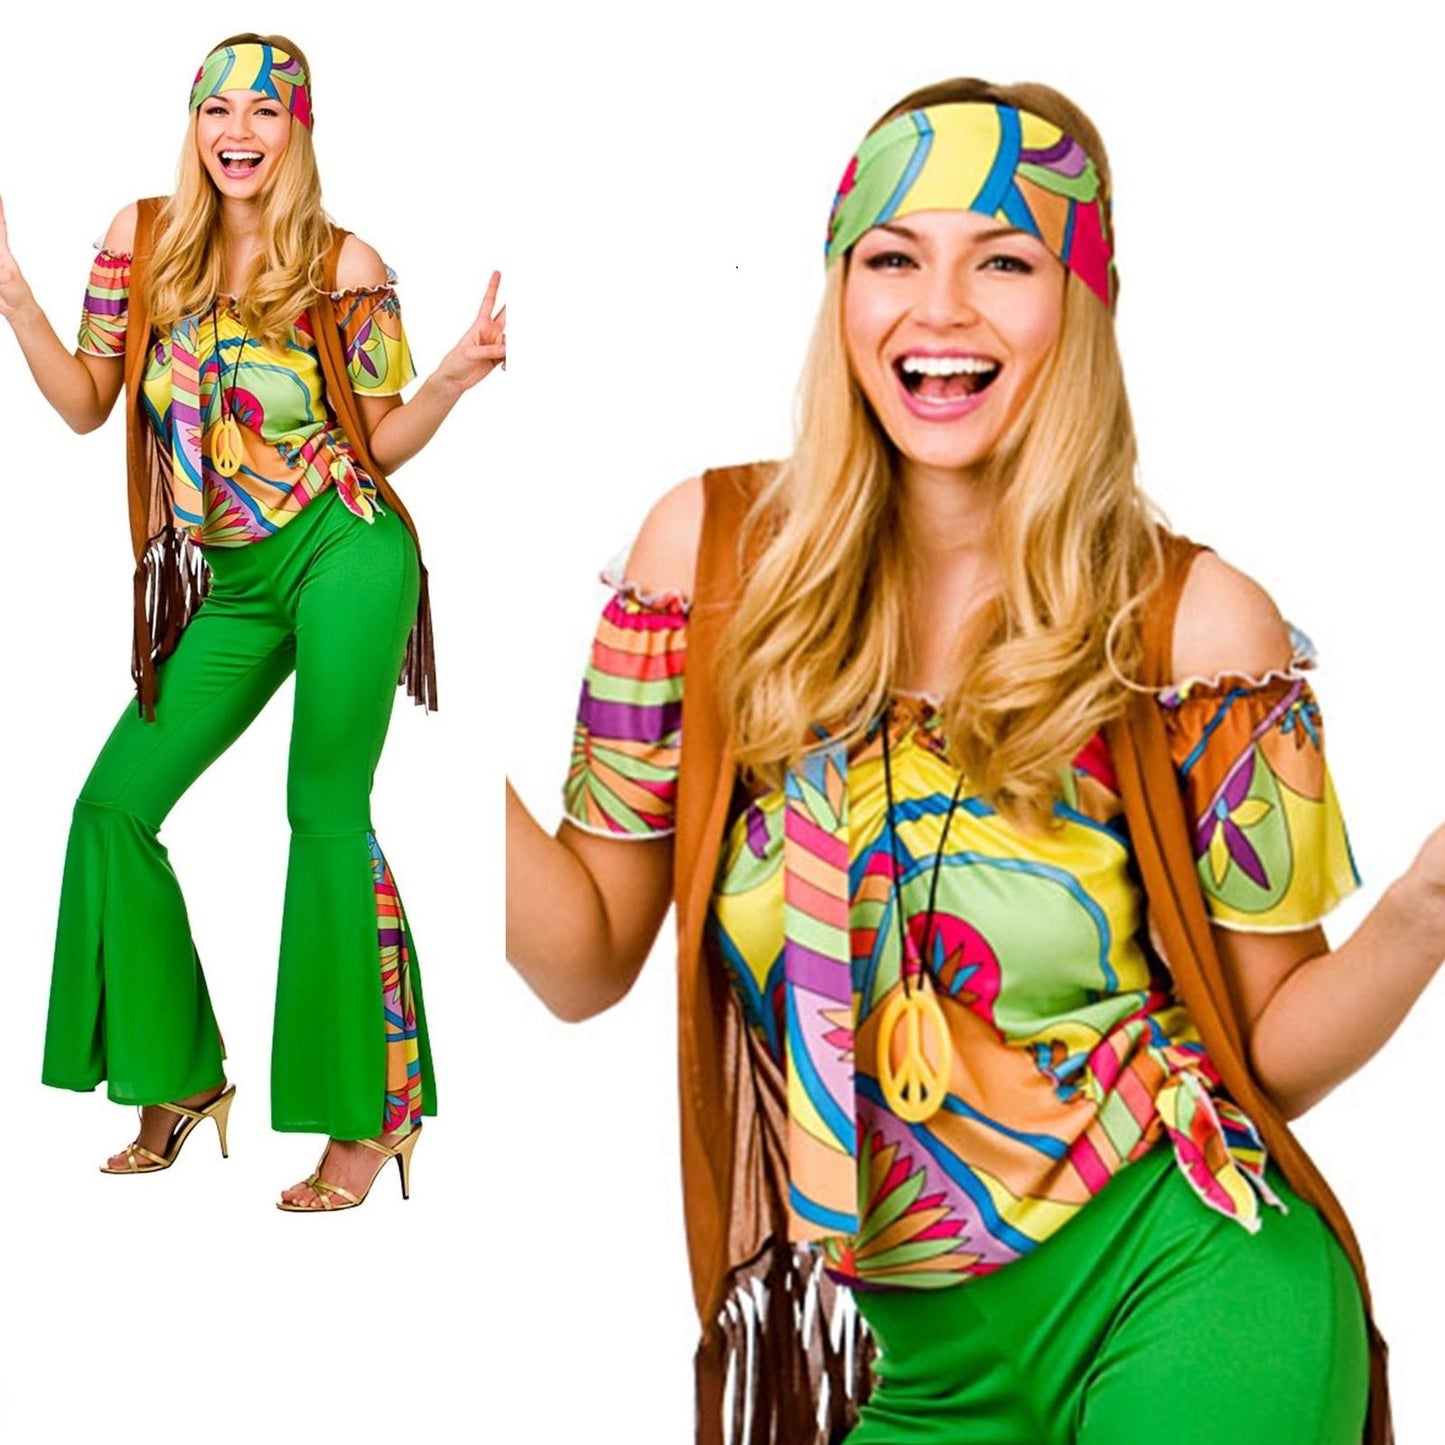 Groovy Hippie Costume - On top promoted